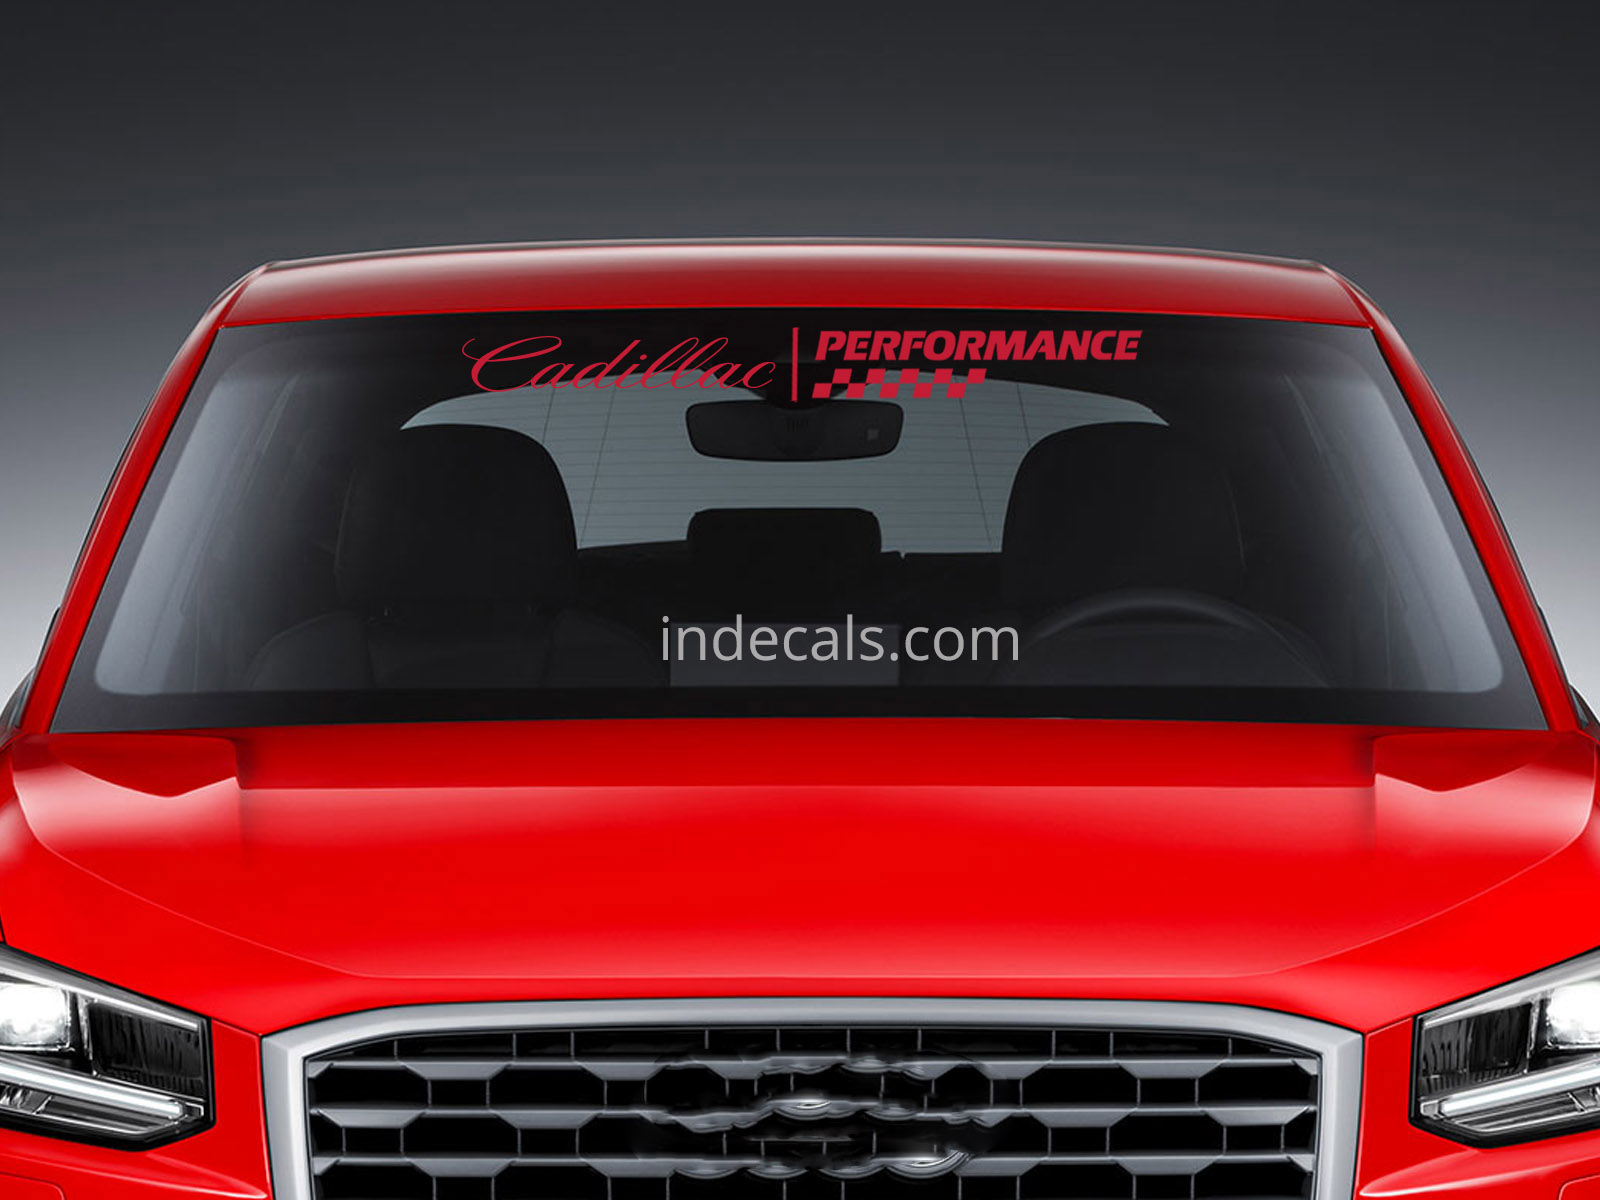 1 x Cadillac Performance Sticker for Windshield or Back Window - Red